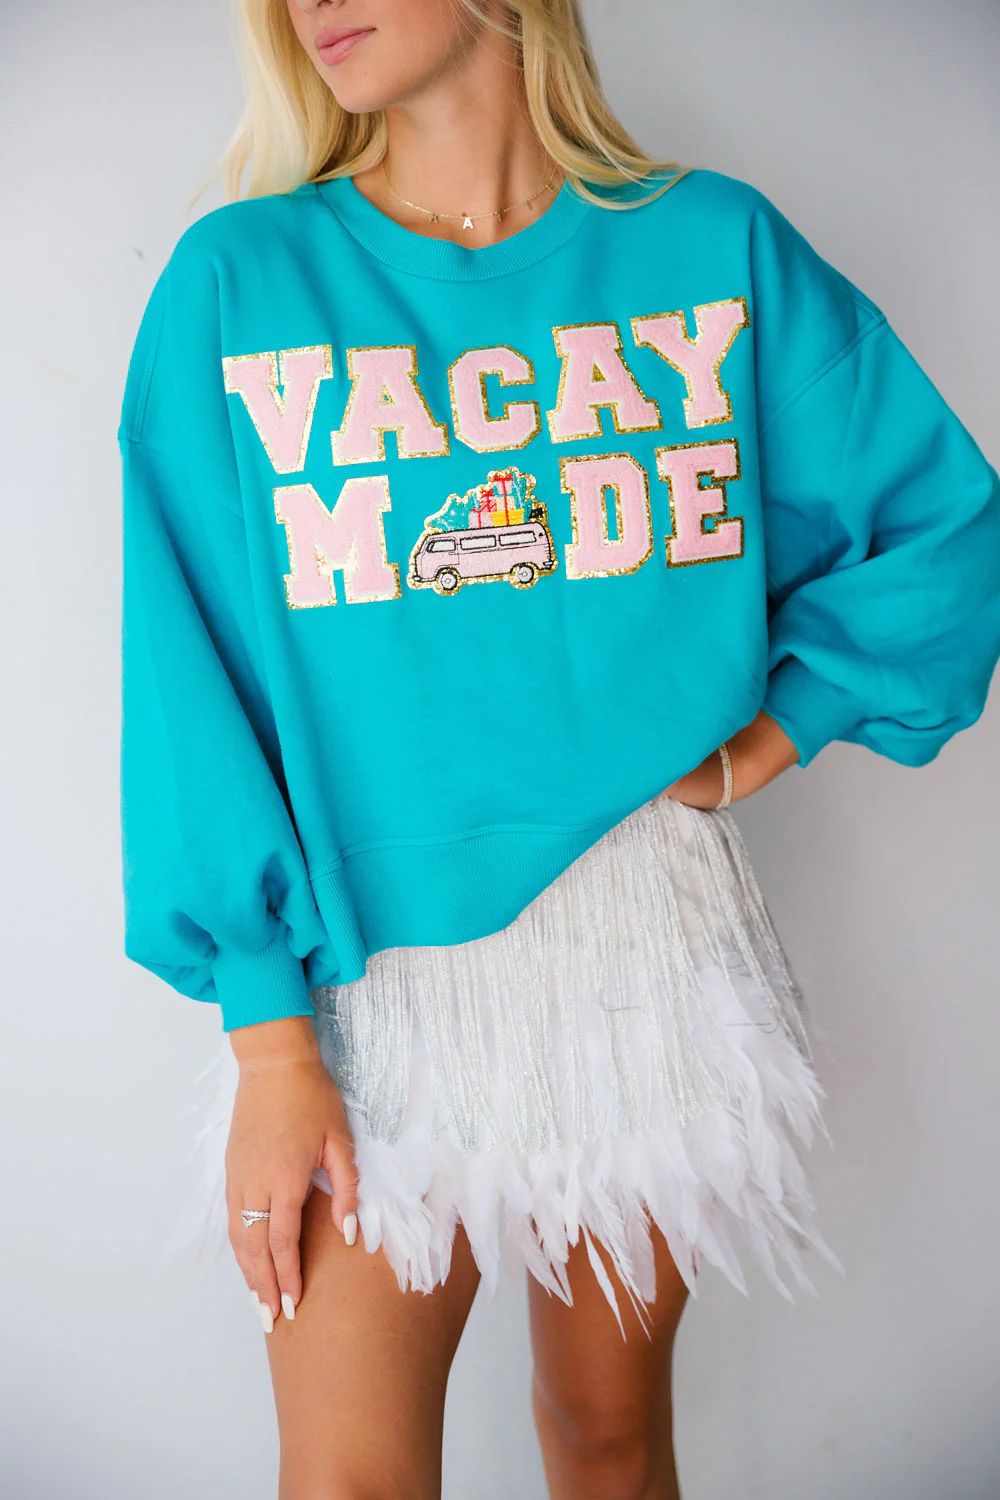 VACAY MODE BLUE PULLOVER | Judith March